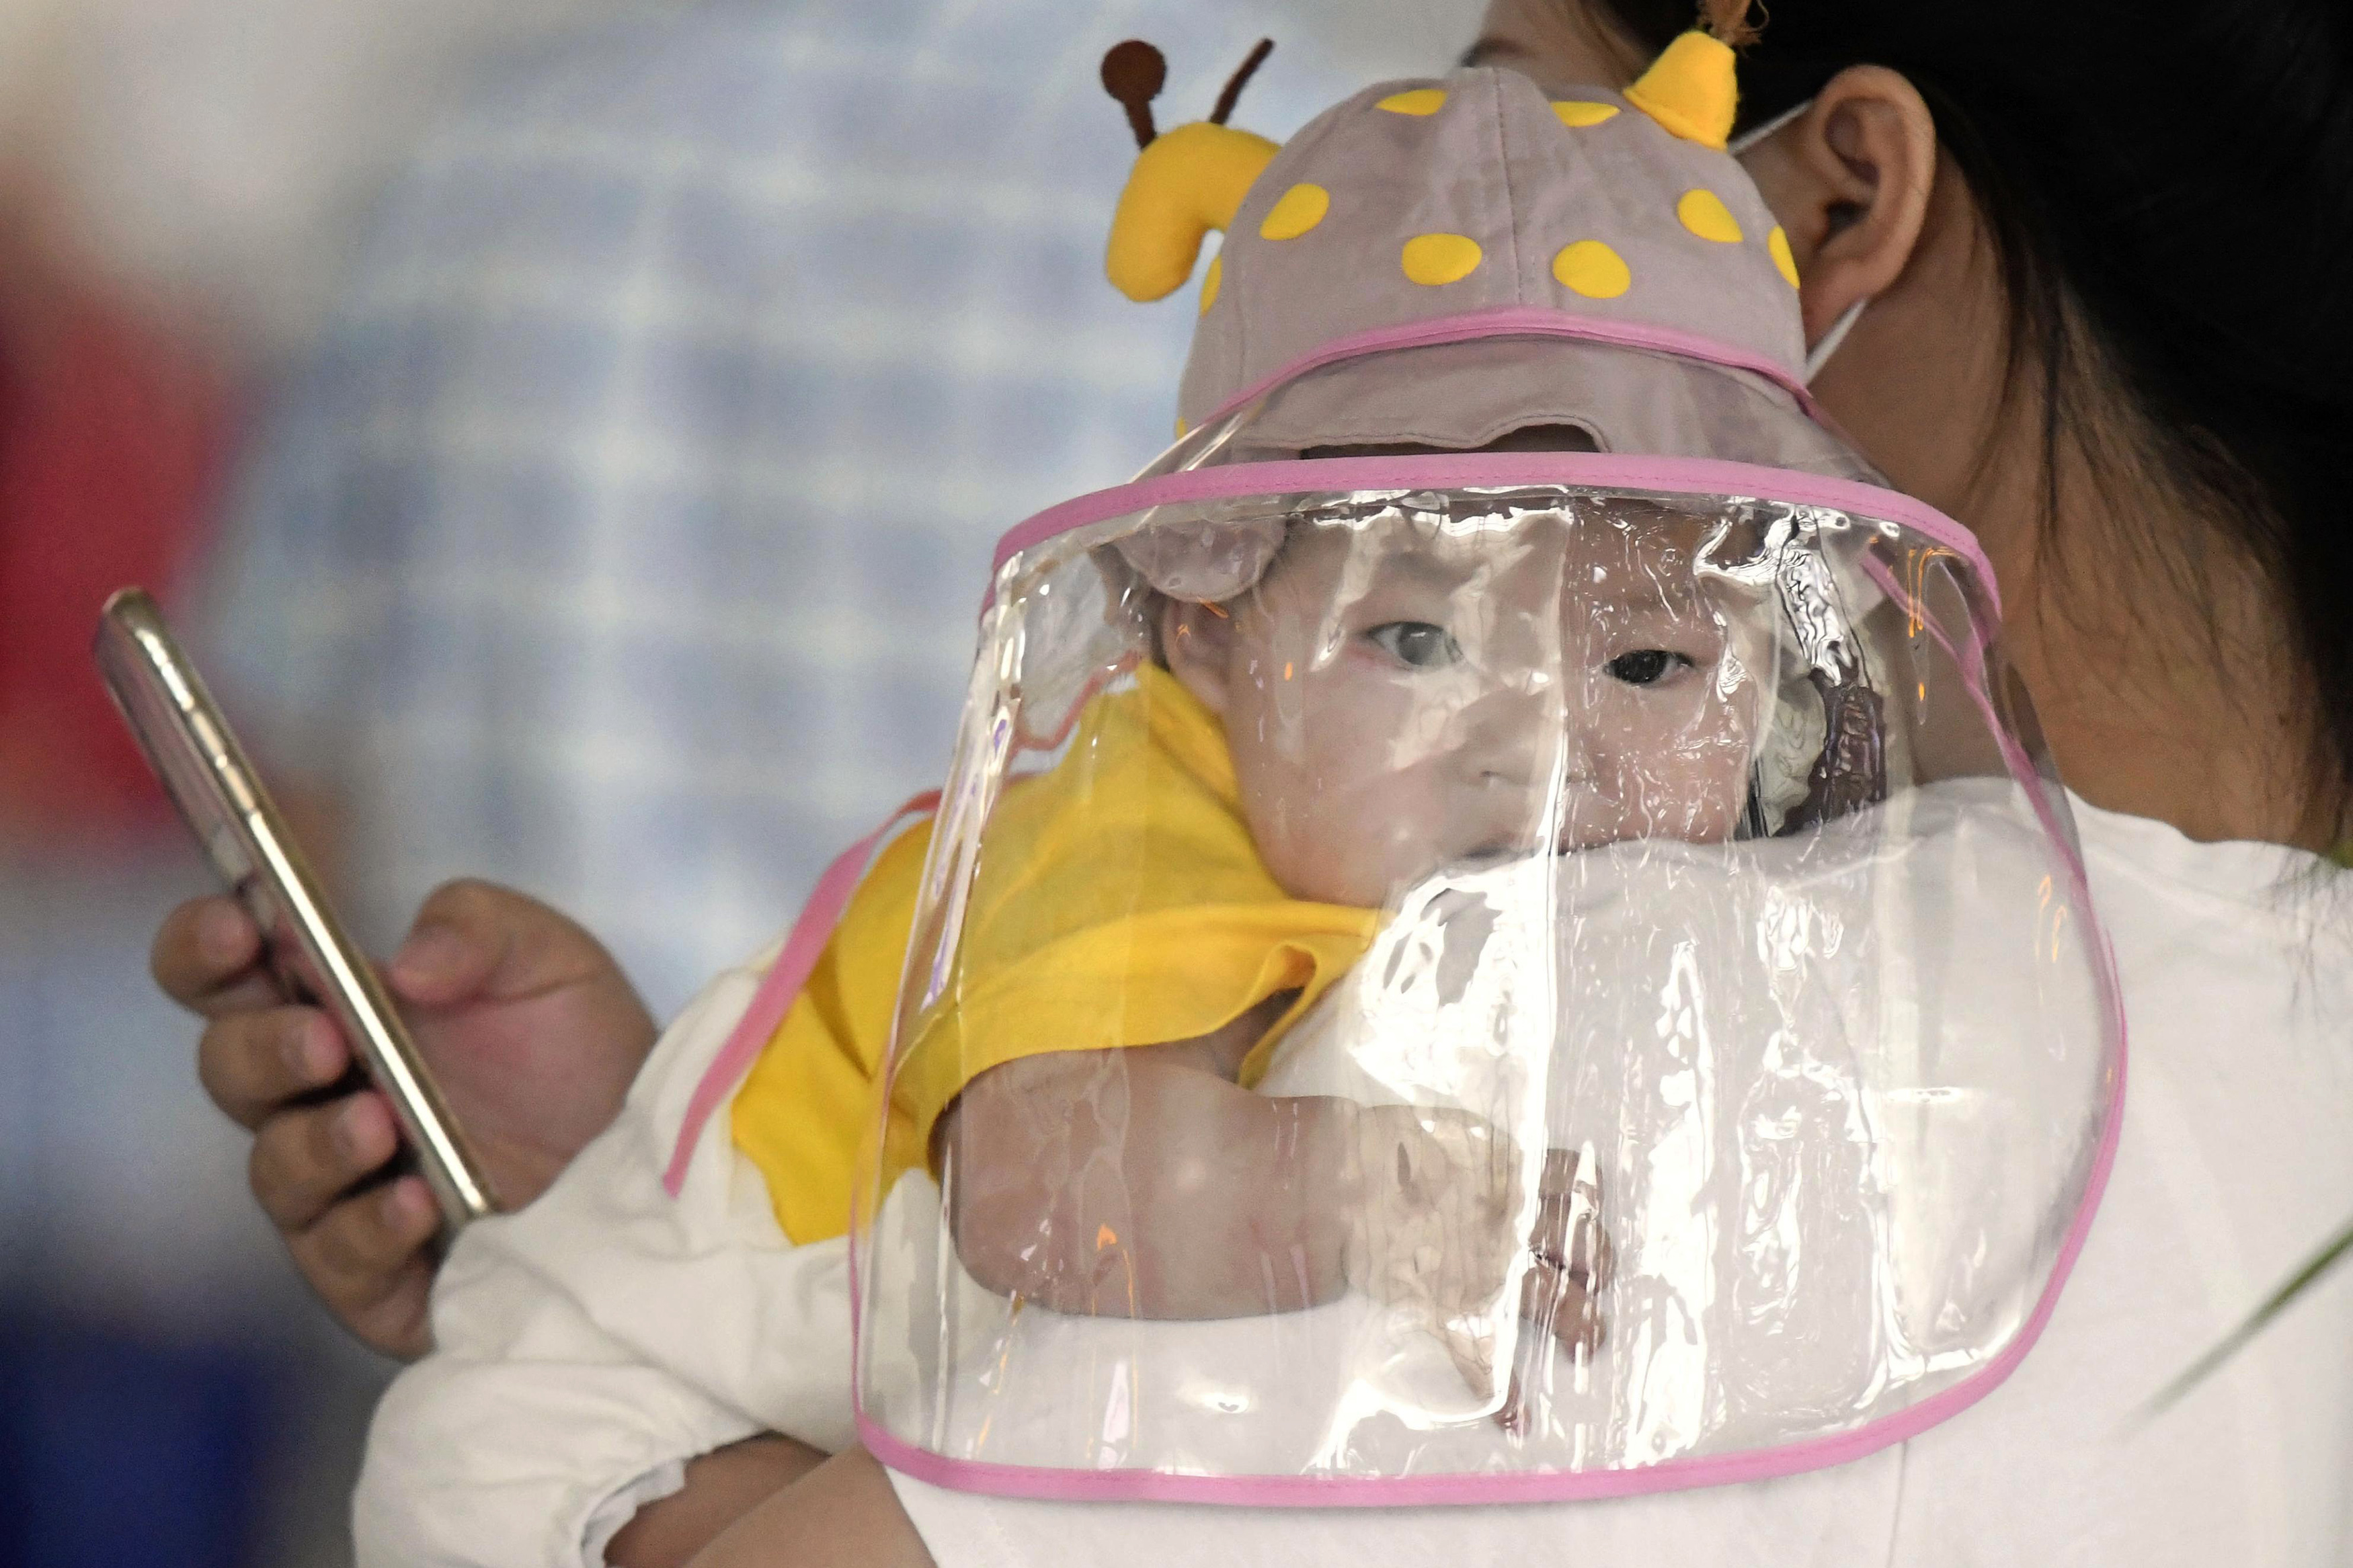 A baby with a face shield waits to board a plane at an airport in Wuhan, central China's Hubei Province Saturday, May 23, 2020. China on Saturday reported no new confirmed cases or deaths from the new coronavirus. Photo: AP